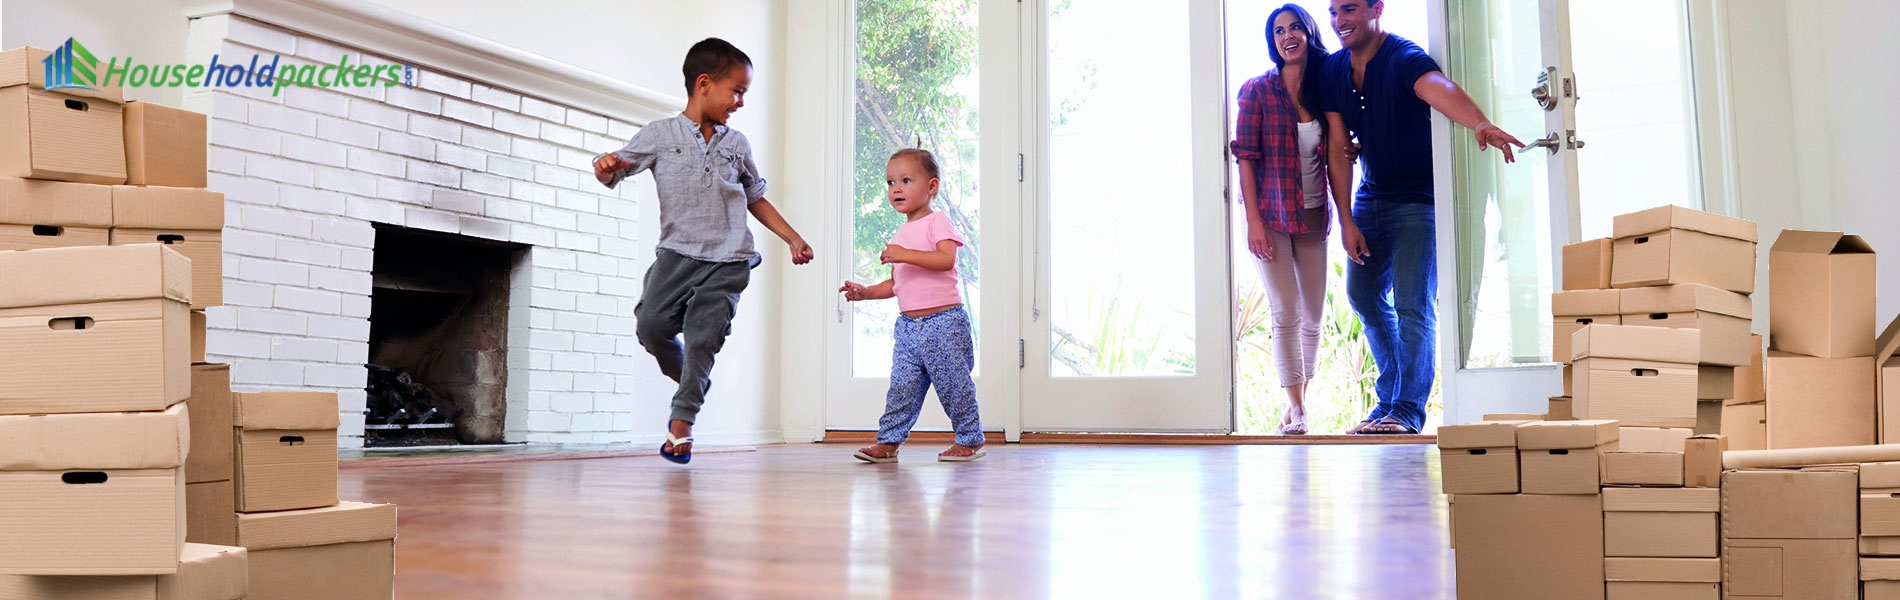 Moving With Kids Make It Easy With Good Packers and Movers